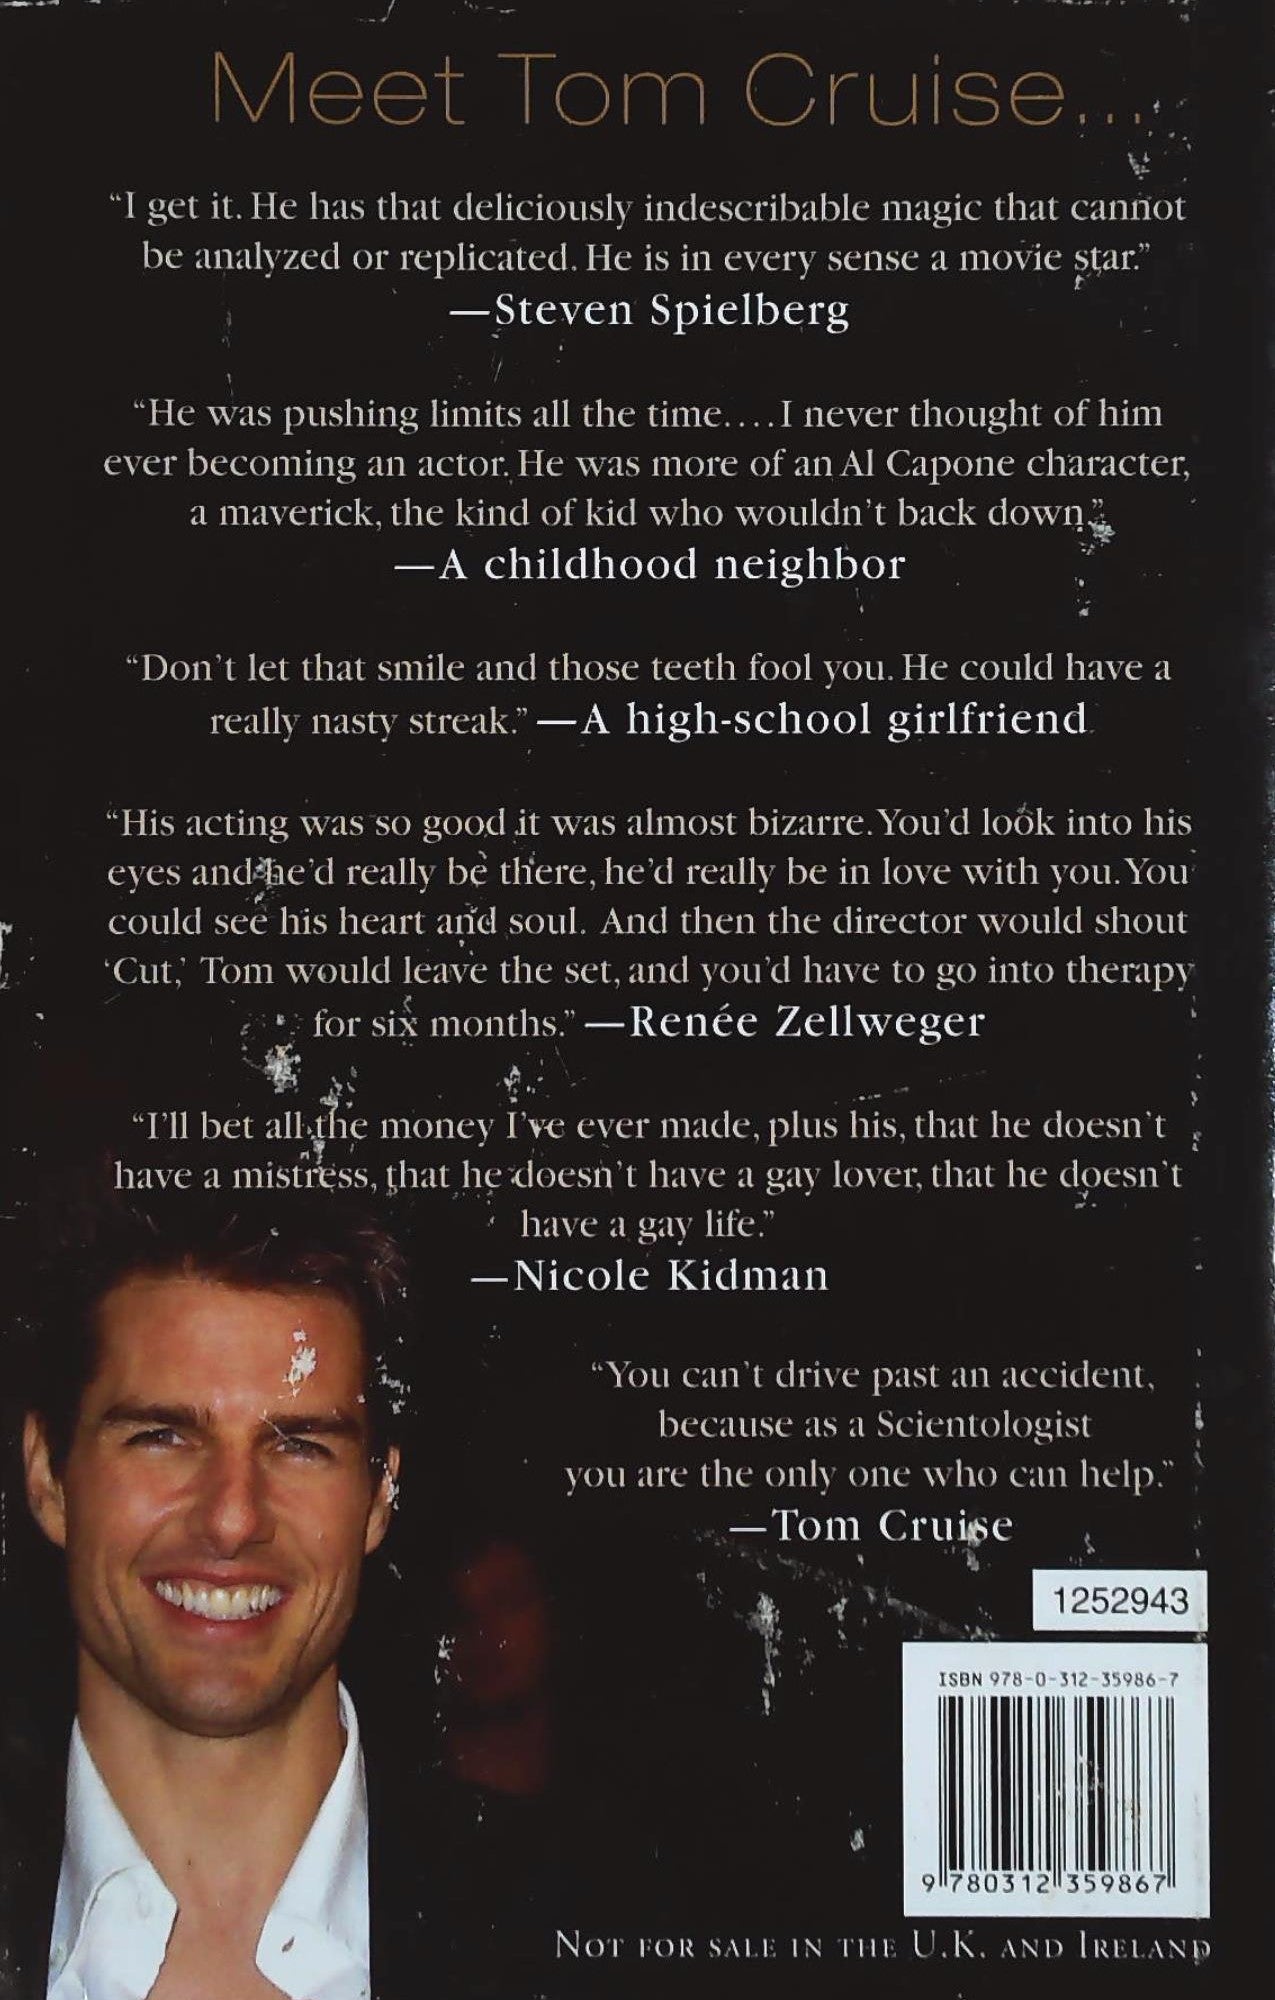 Tom Cruise an Unauthorized Biography (Andrew Morton)